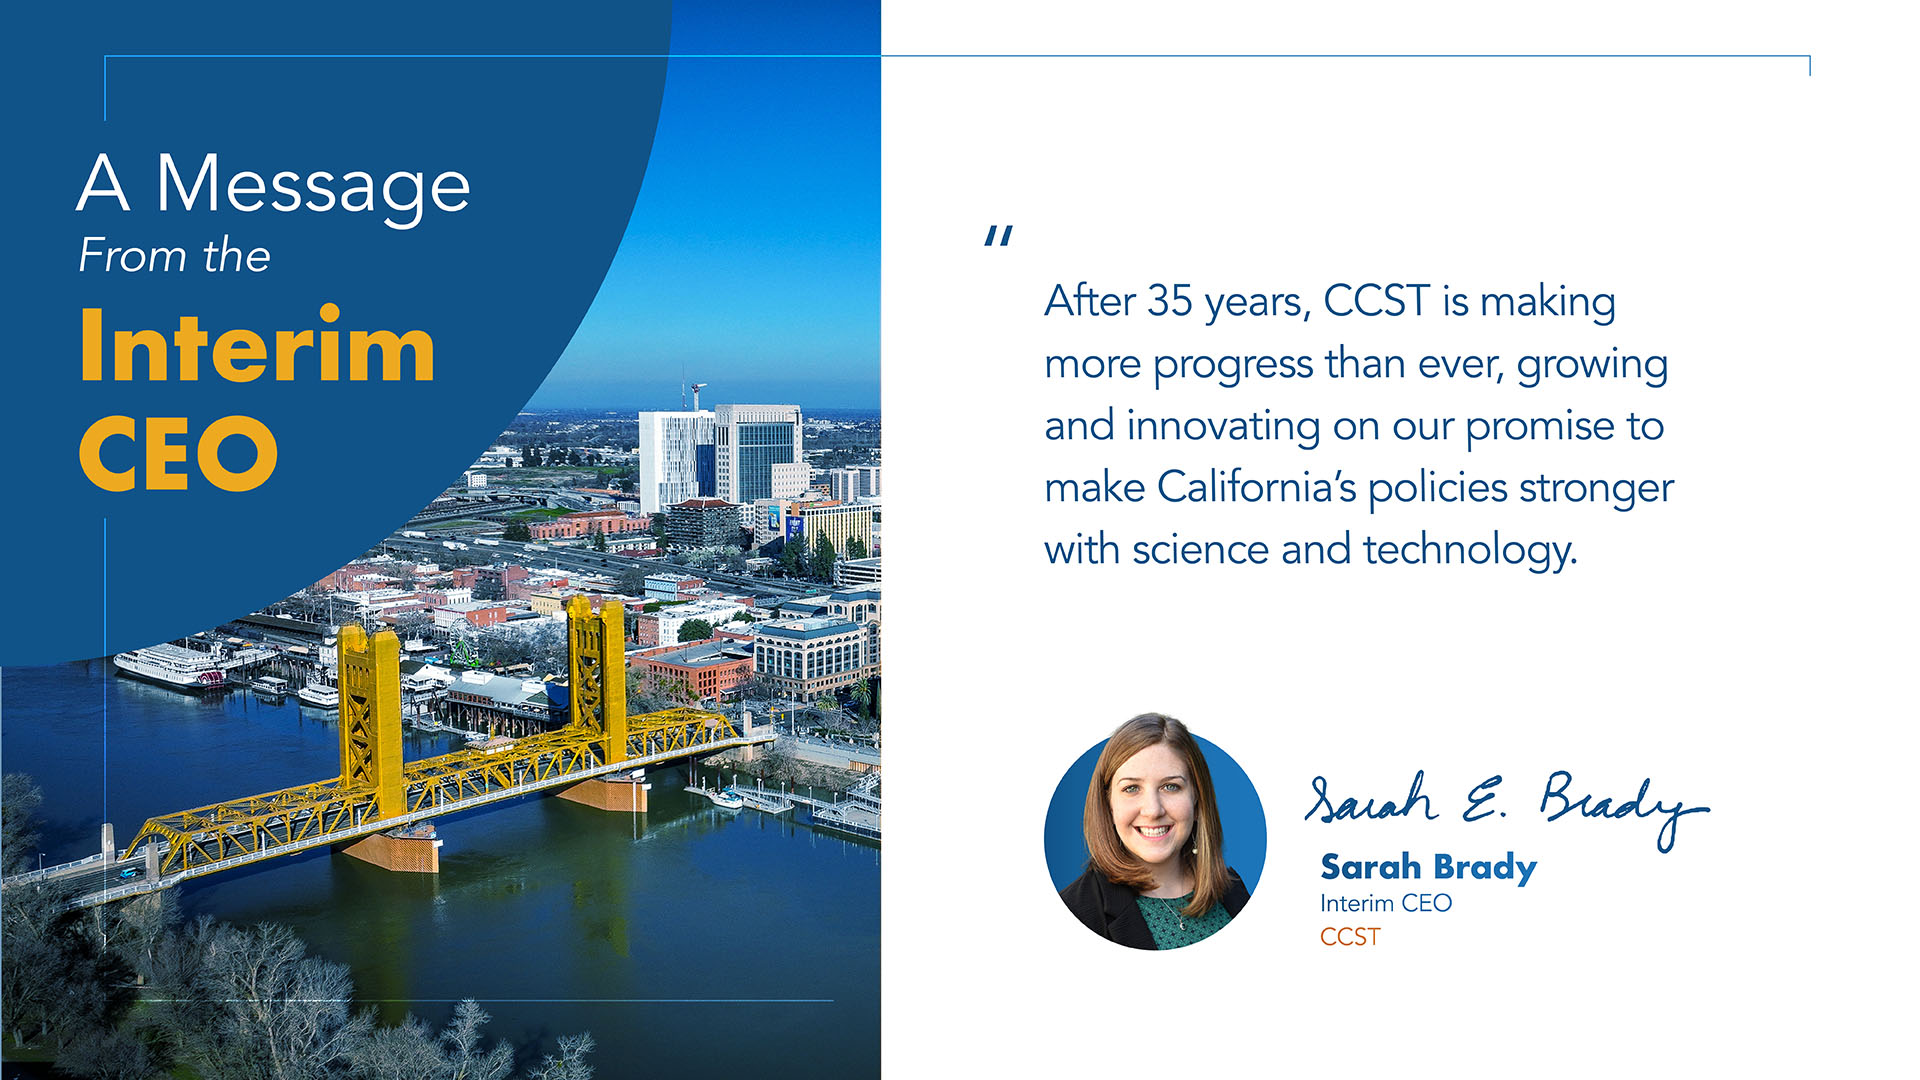 A graphic with a big blue circle background on the left with text that says a Message from the Interim CEO, an overhead photo of Tower Bridge in Sacramento, and a white column with a quote and image of Interim CEO Sarah Brady: "After 35 years, CCST is making more progress than ever, growing and innovating on our promise to make California’s policies stronger with science and technology."